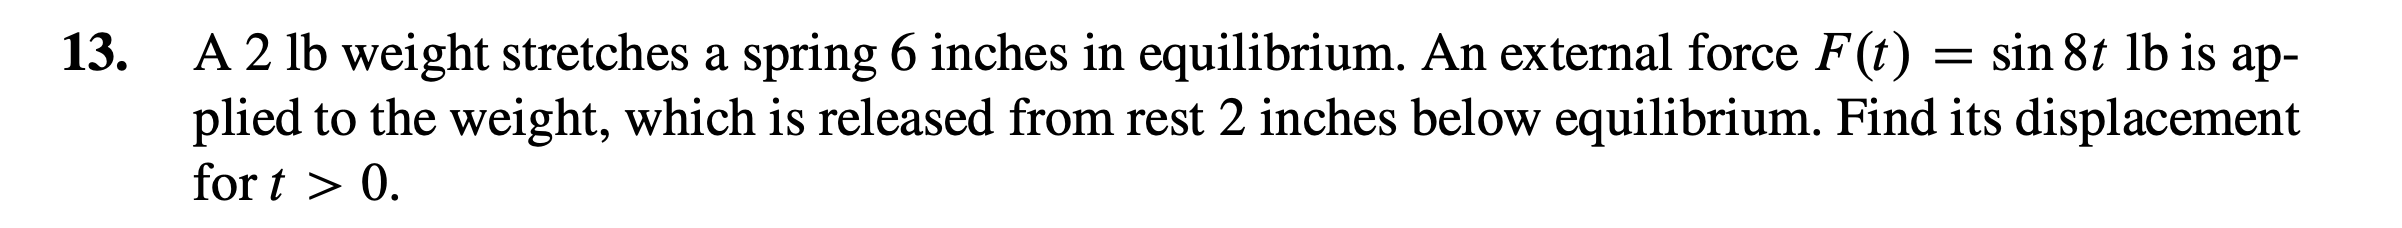 13.
A 2 lb weight stretches a spring 6 inches in equilibrium. An external force F(t) = sin 8t lb is
plied to the weight, which is released from rest 2 inches below equilibrium. Find its displacement
for t > 0.
